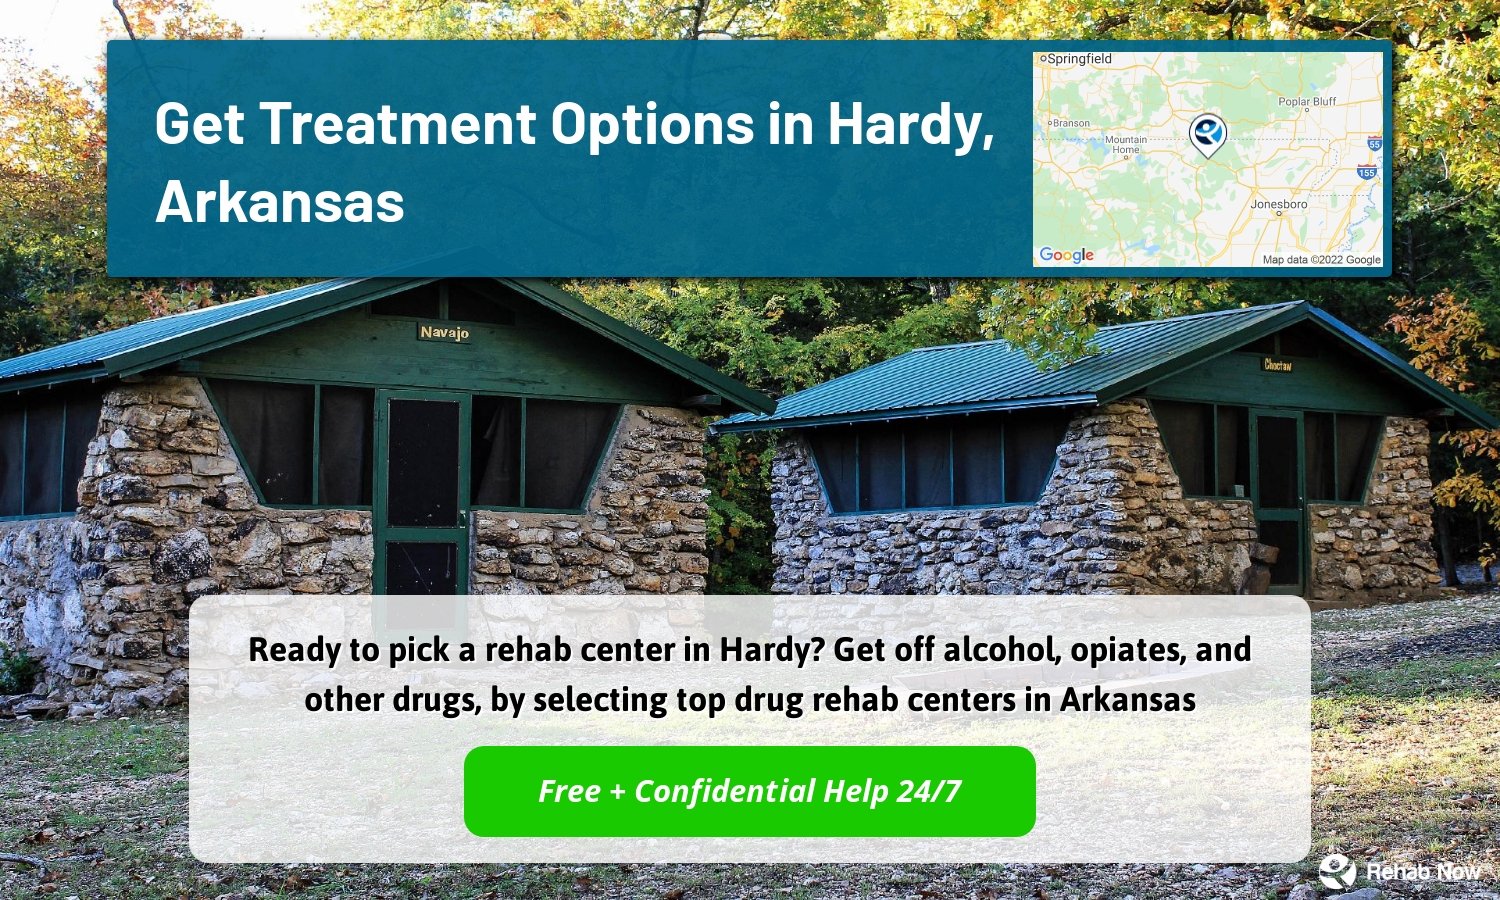 Ready to pick a rehab center in Hardy? Get off alcohol, opiates, and other drugs, by selecting top drug rehab centers in Arkansas